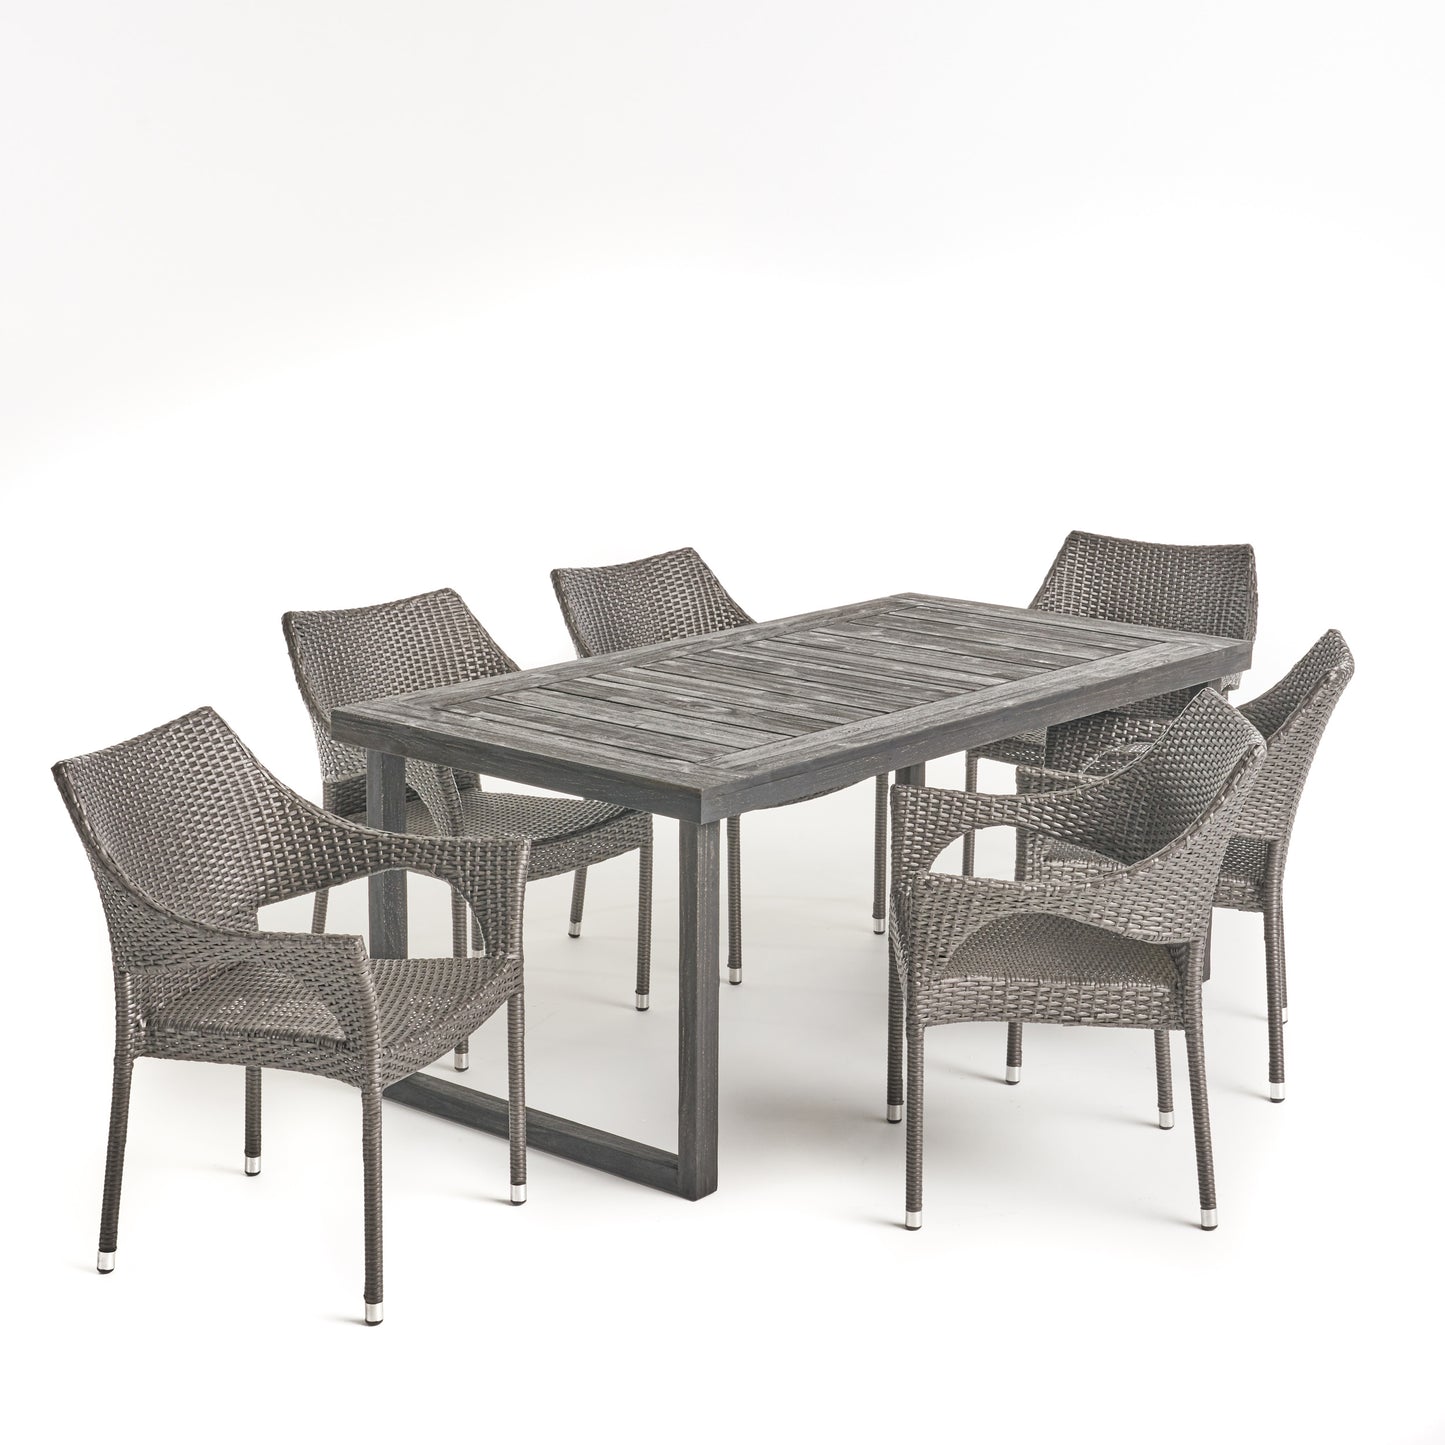 Joa Outdoor 7 Piece Acacia Wood Dining Set with Stacking Wicker Chairs, Sandblast Dark Gray and Gray